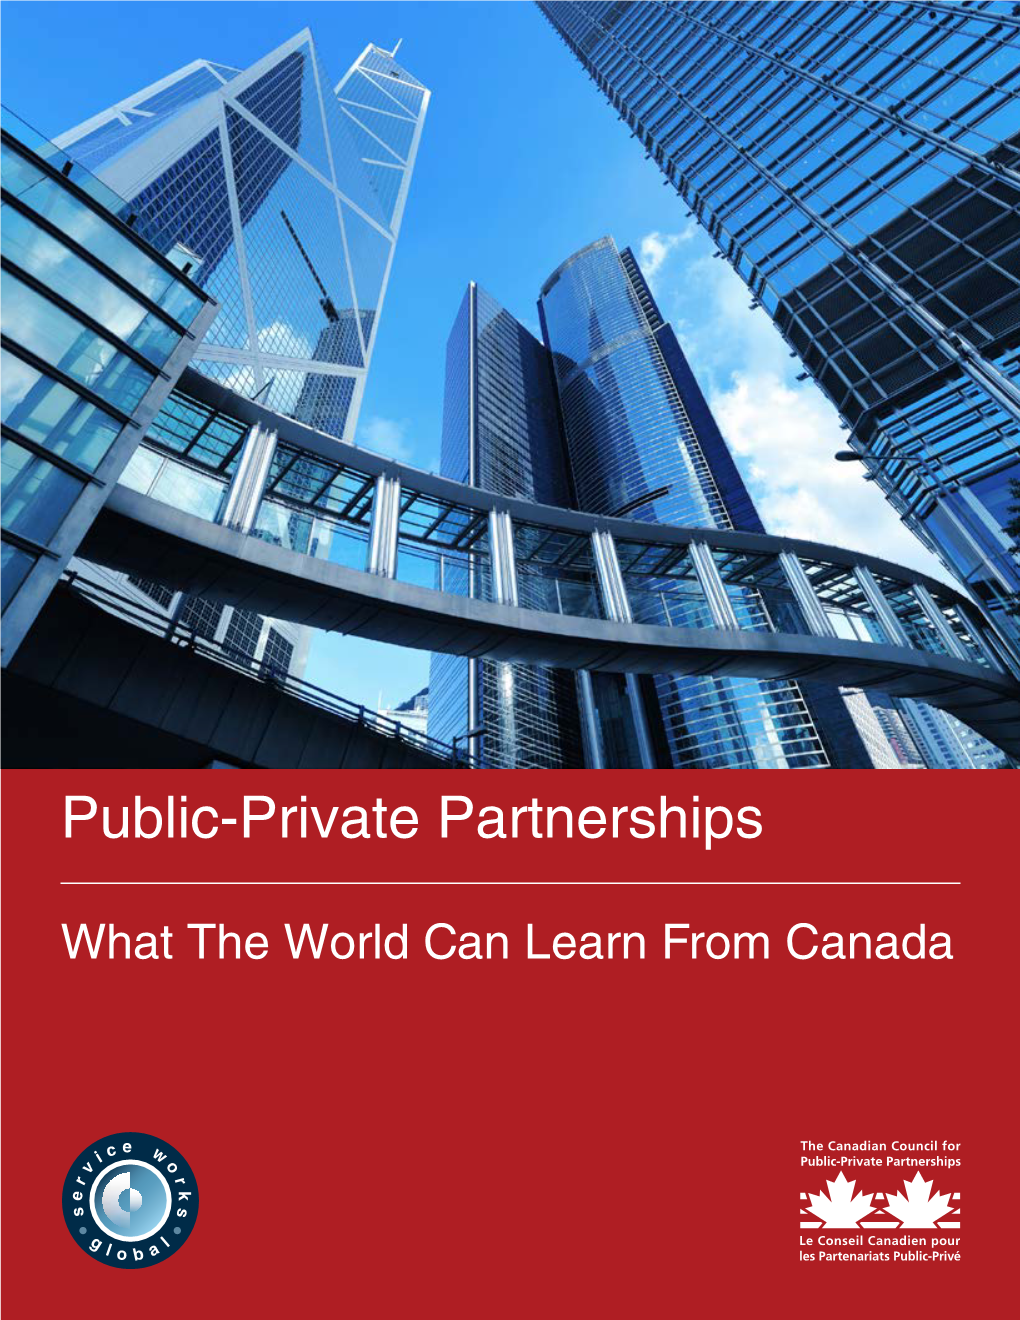 Public-Private Partnerships: What the World Can Learn From